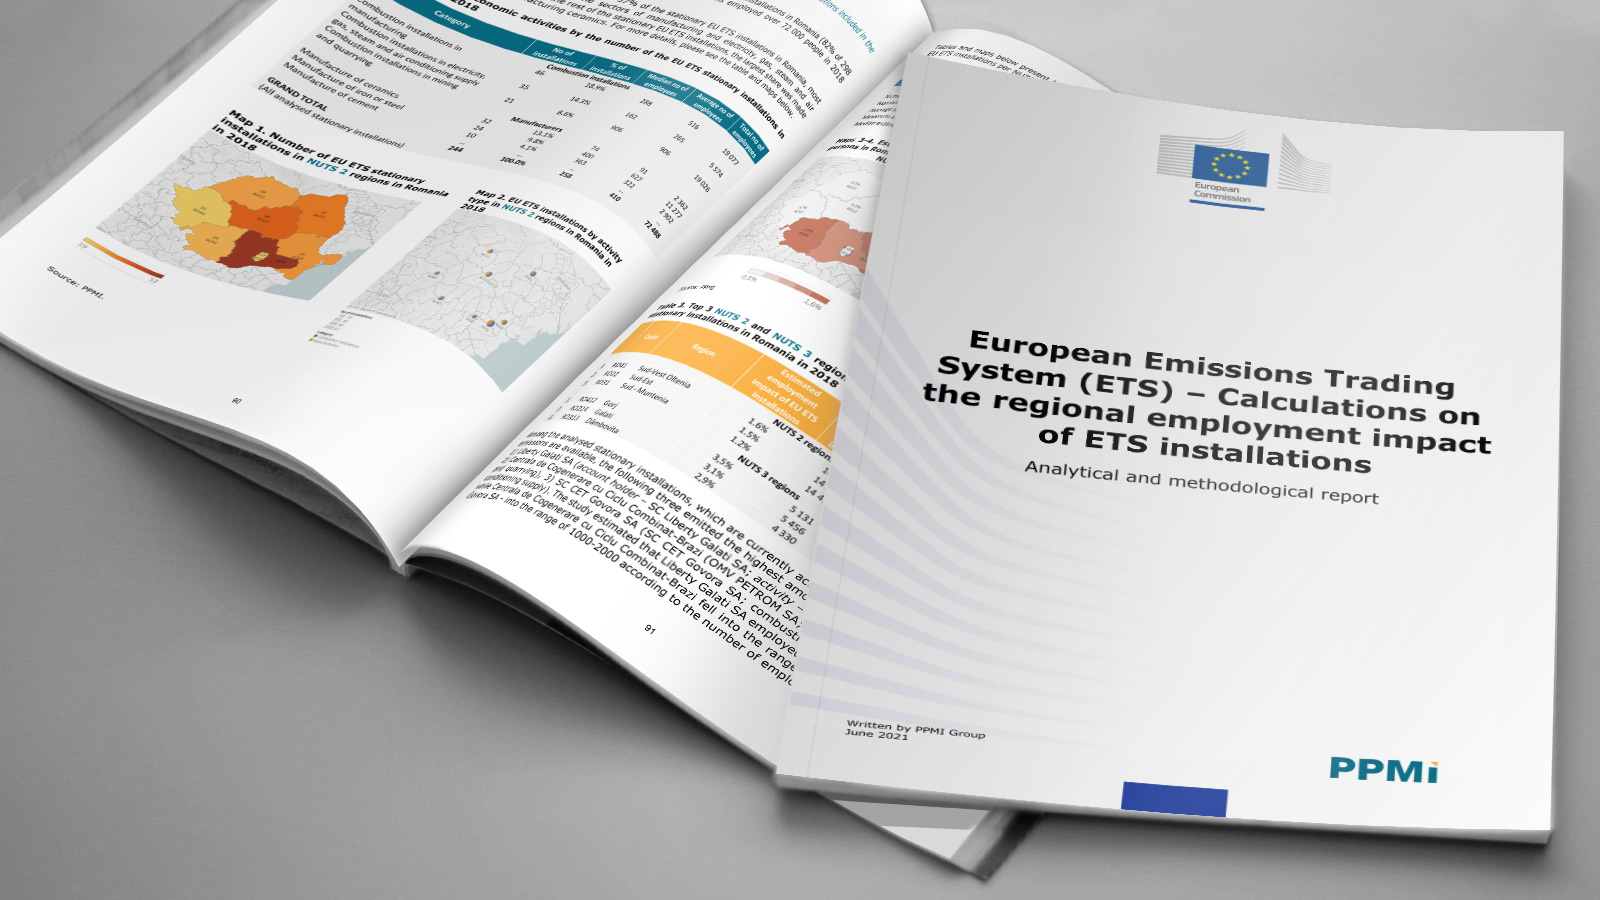 PPMI completed the study on calculating the employment impact of EU ETS installations in the EU regions